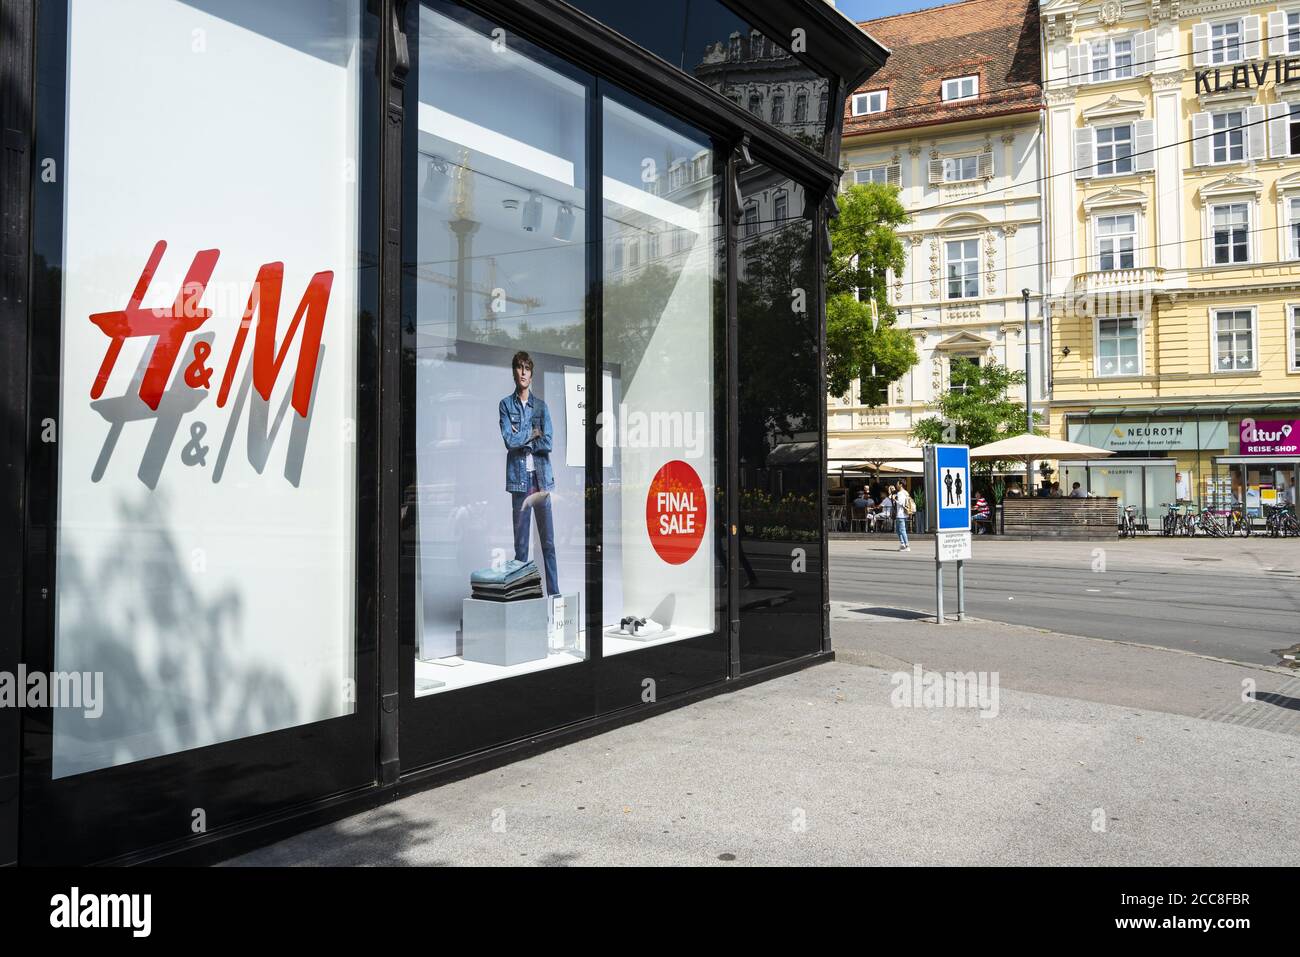 Architecture Building Shop H&m High Resolution Stock Photography and Images  - Alamy